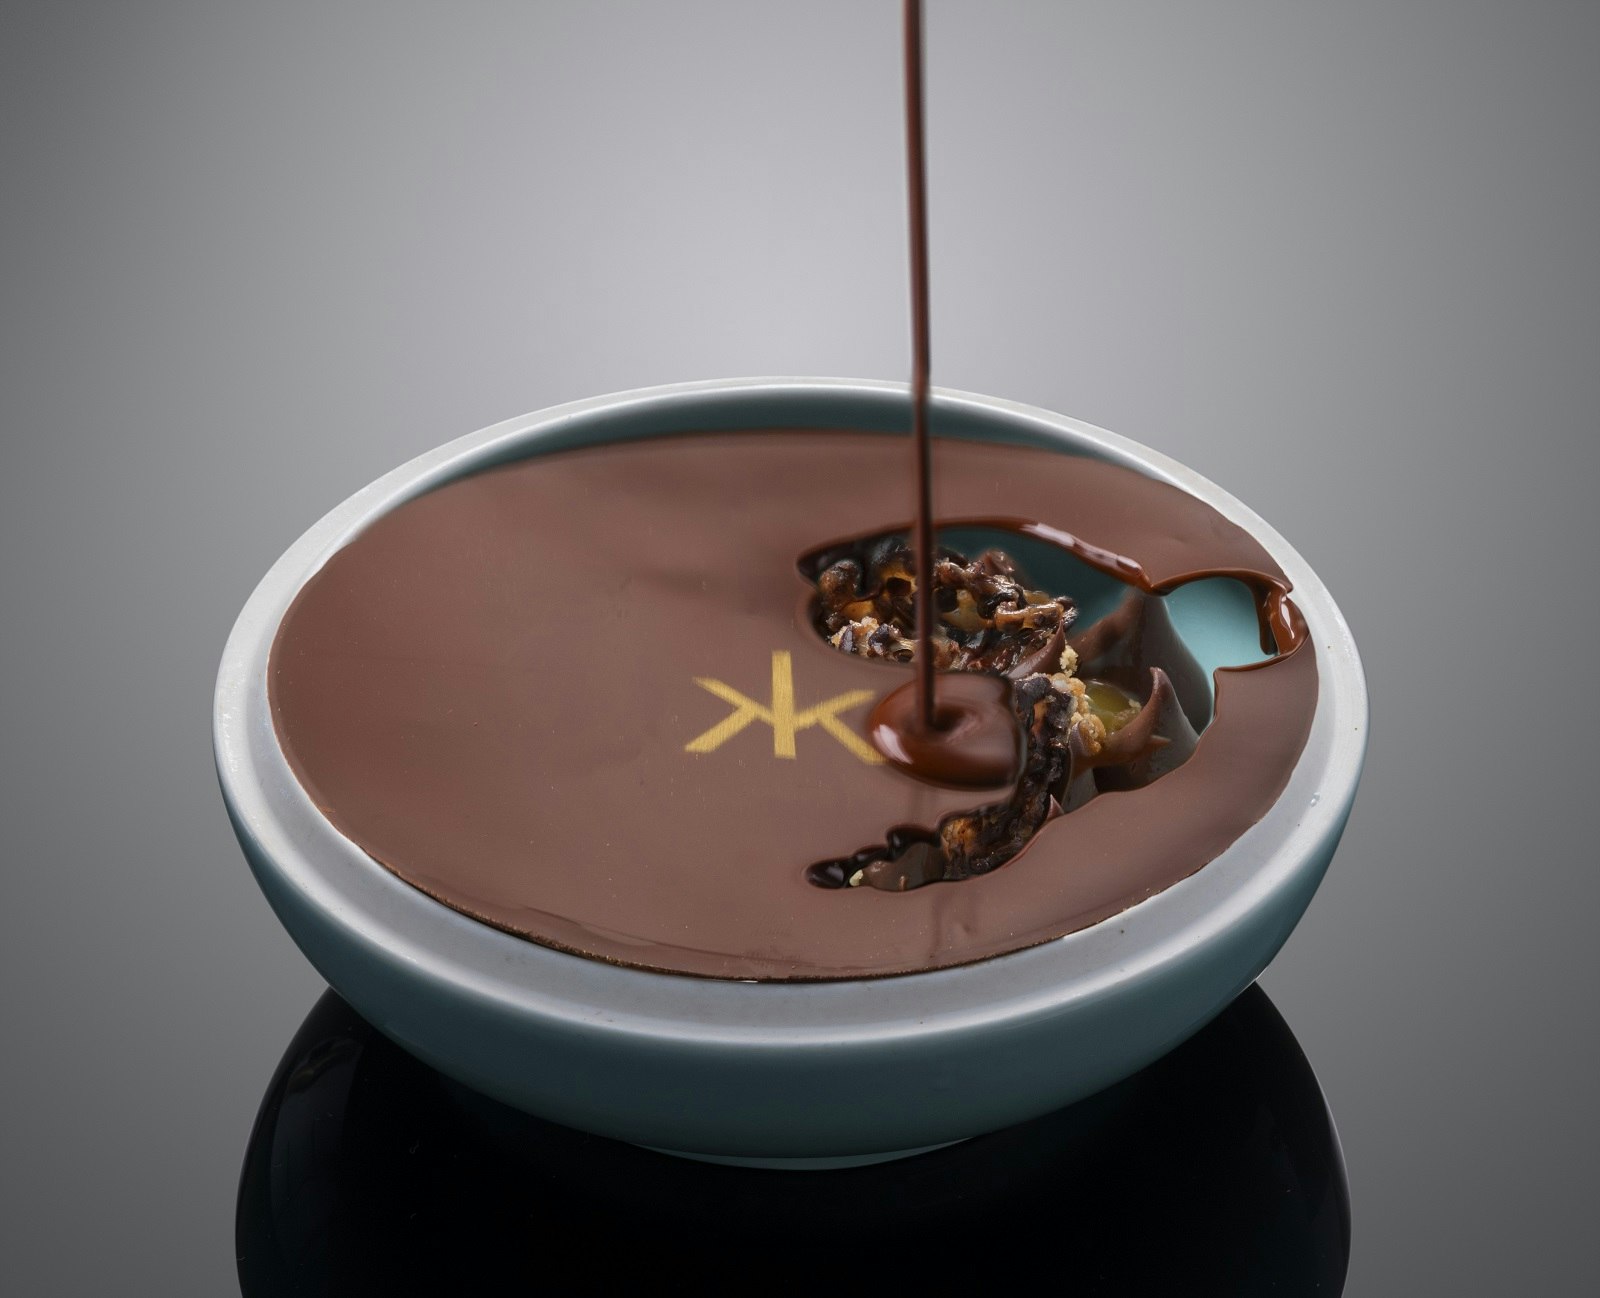 An indulgent Slovenian chocolate pot, featuring the Hakkasan logo in gold. The hard chocolate surface is being drizzled with a hot chocolate sauce to melt the top and reveal the insides. 